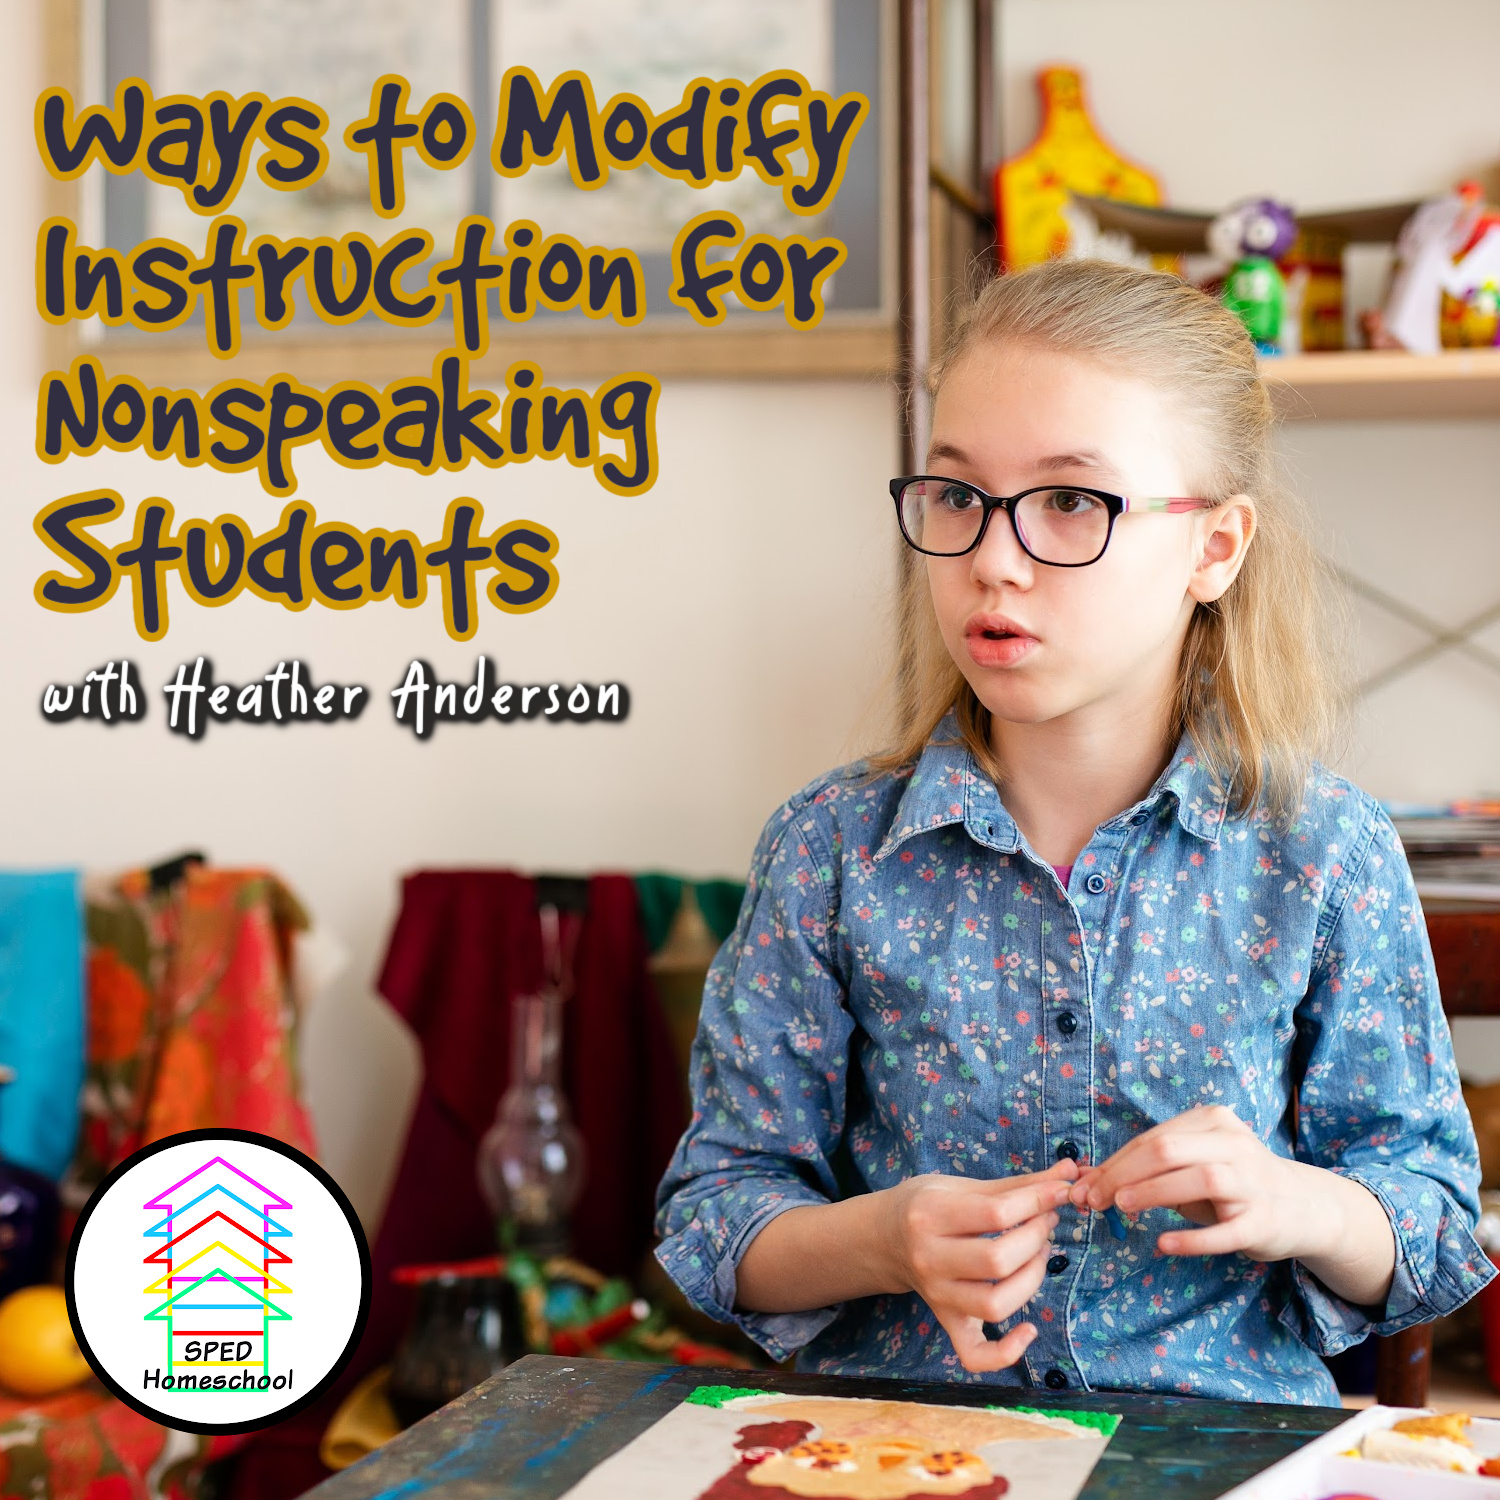 Ways to Modify Instruction for Nonspeaking Students